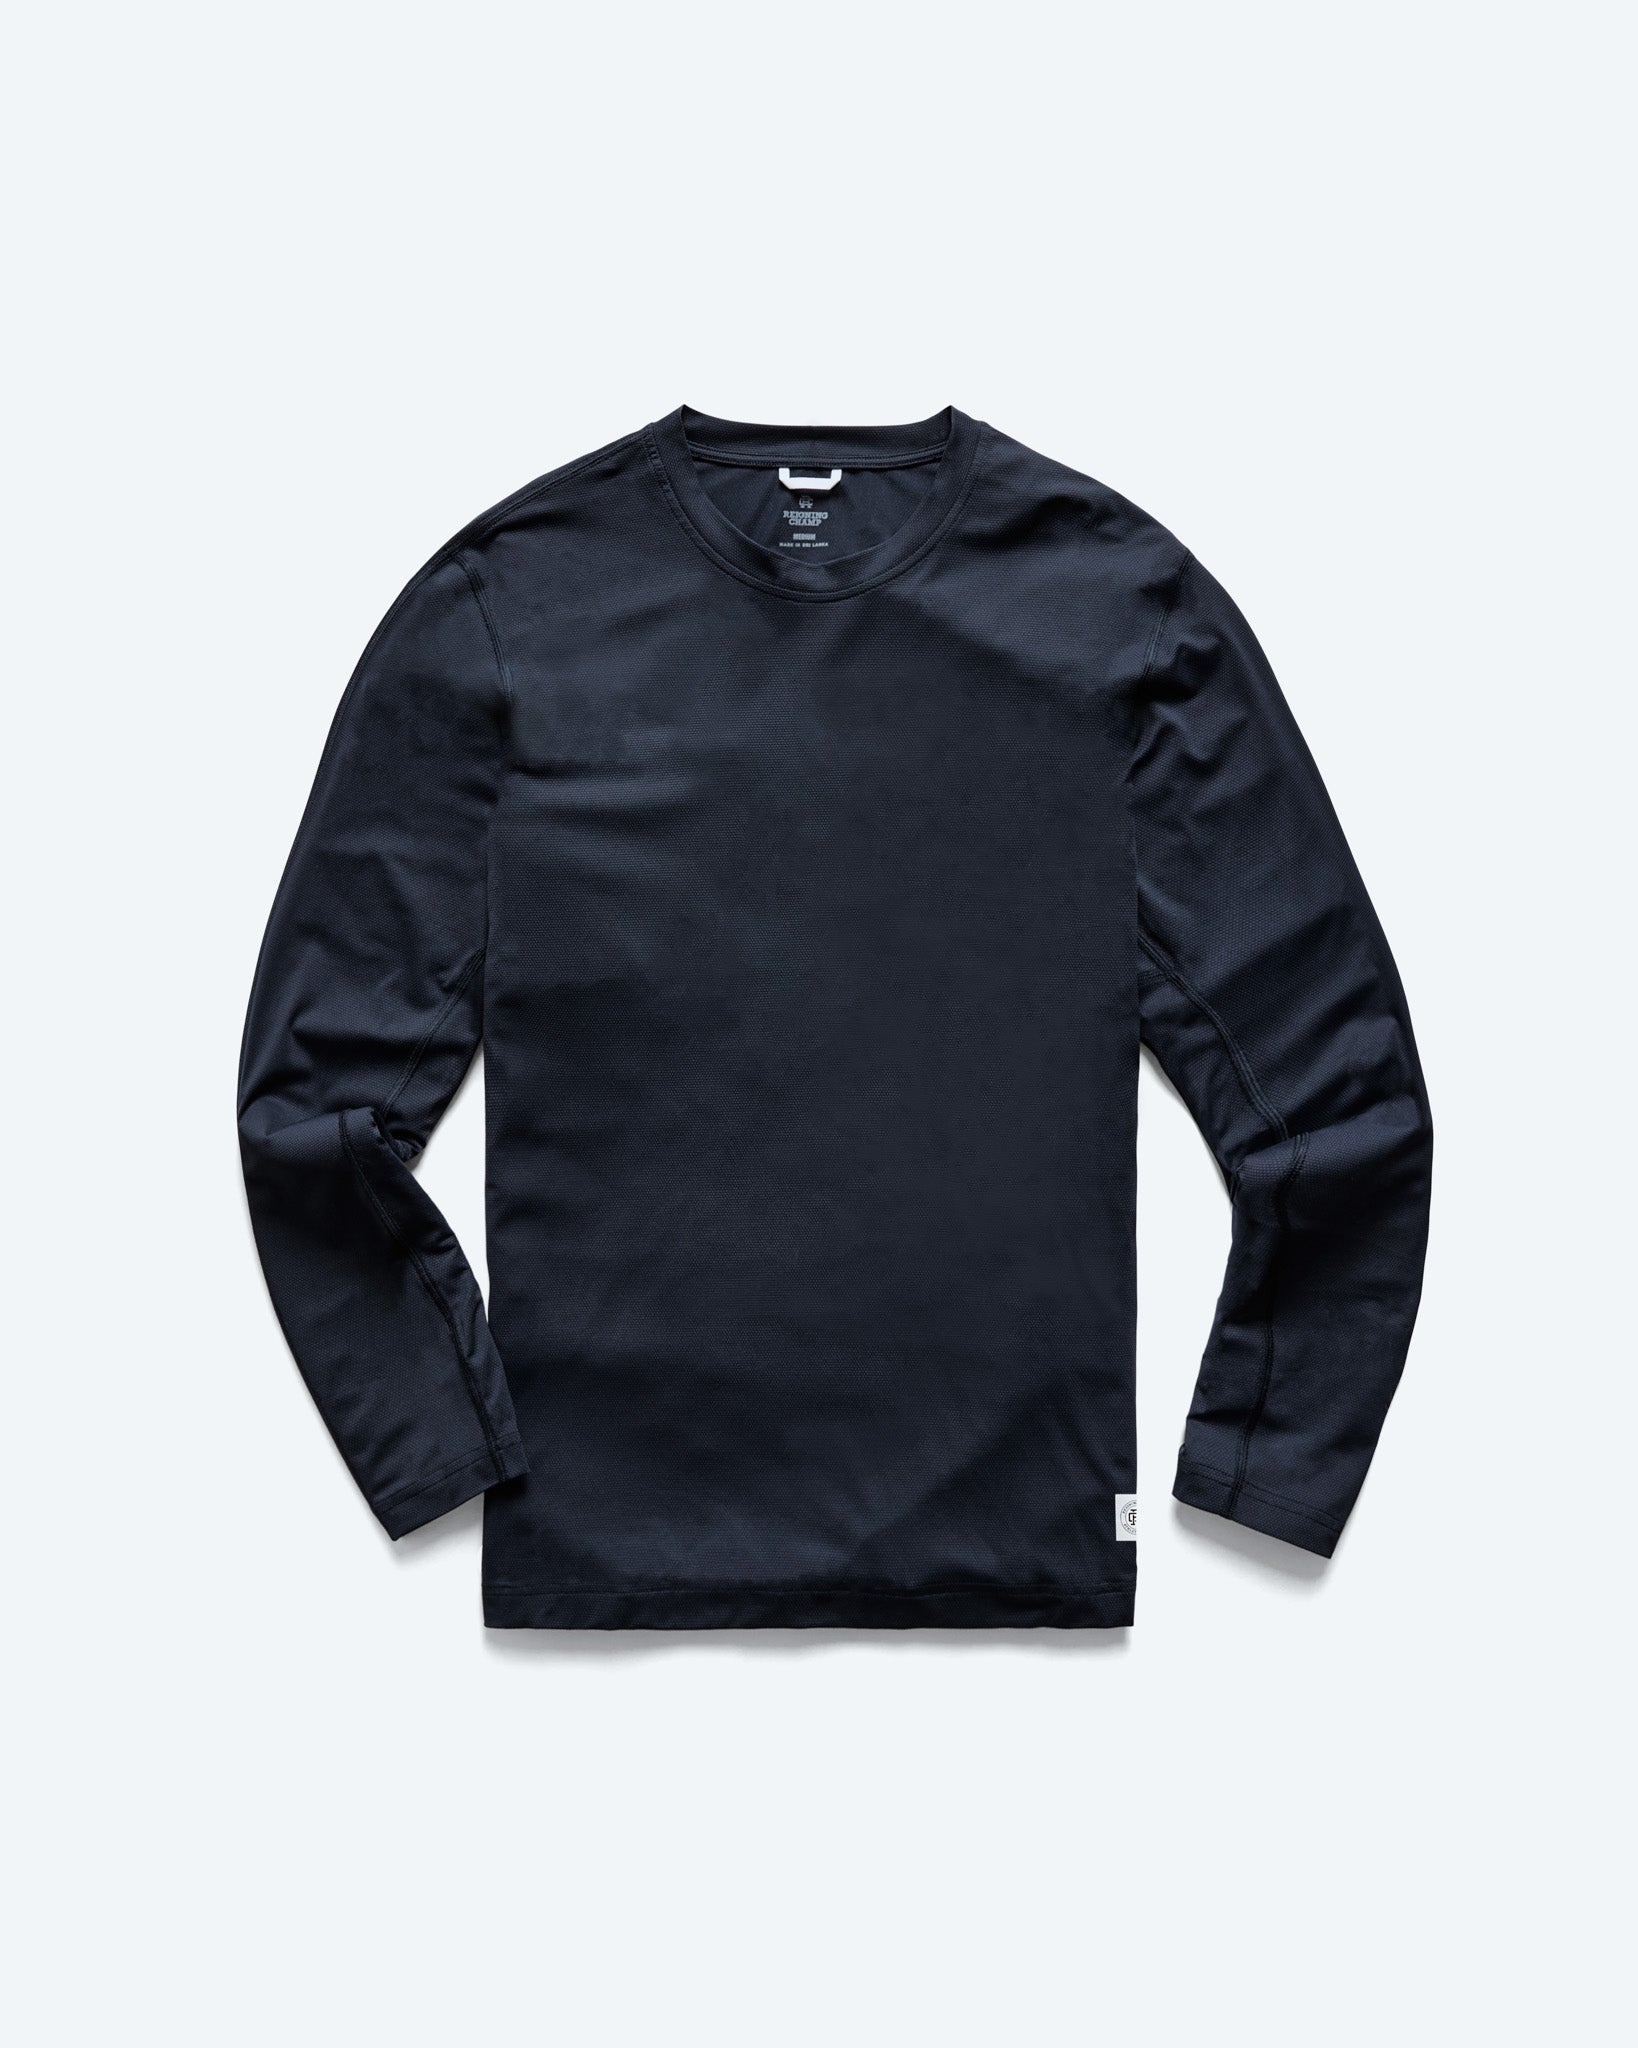 Men's T-Shirts & Tops | Performance | Reigning Champ